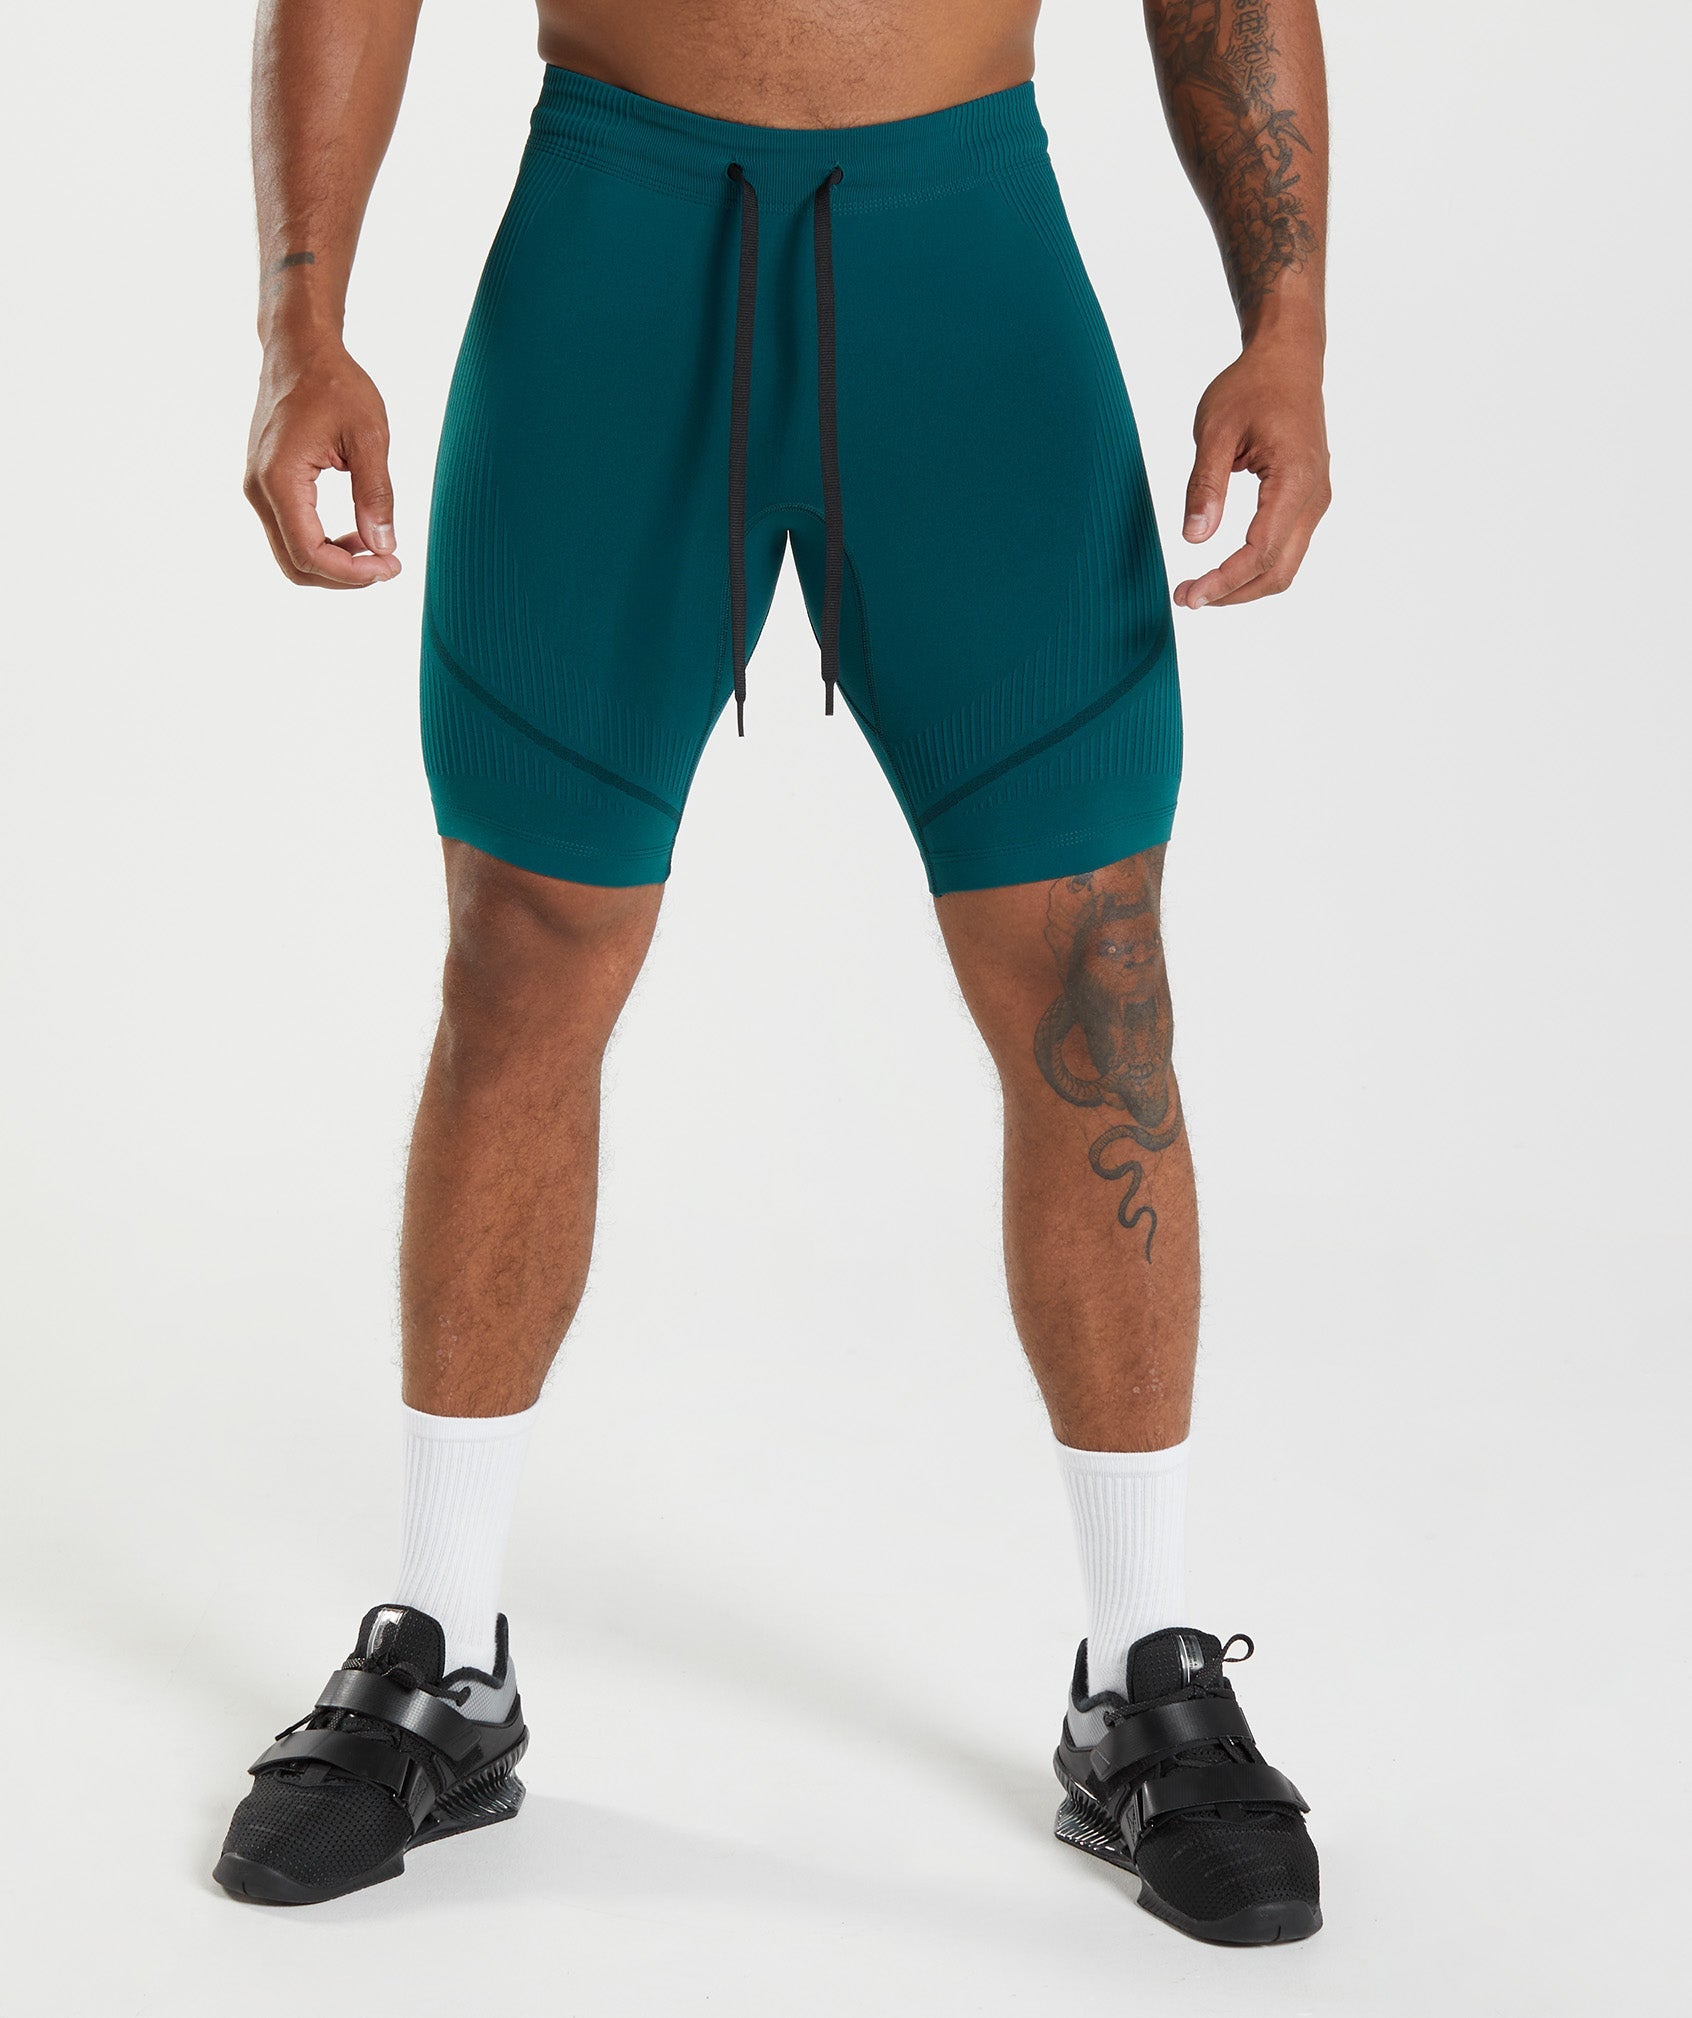 315 Seamless Shorts in Winter Teal/Black